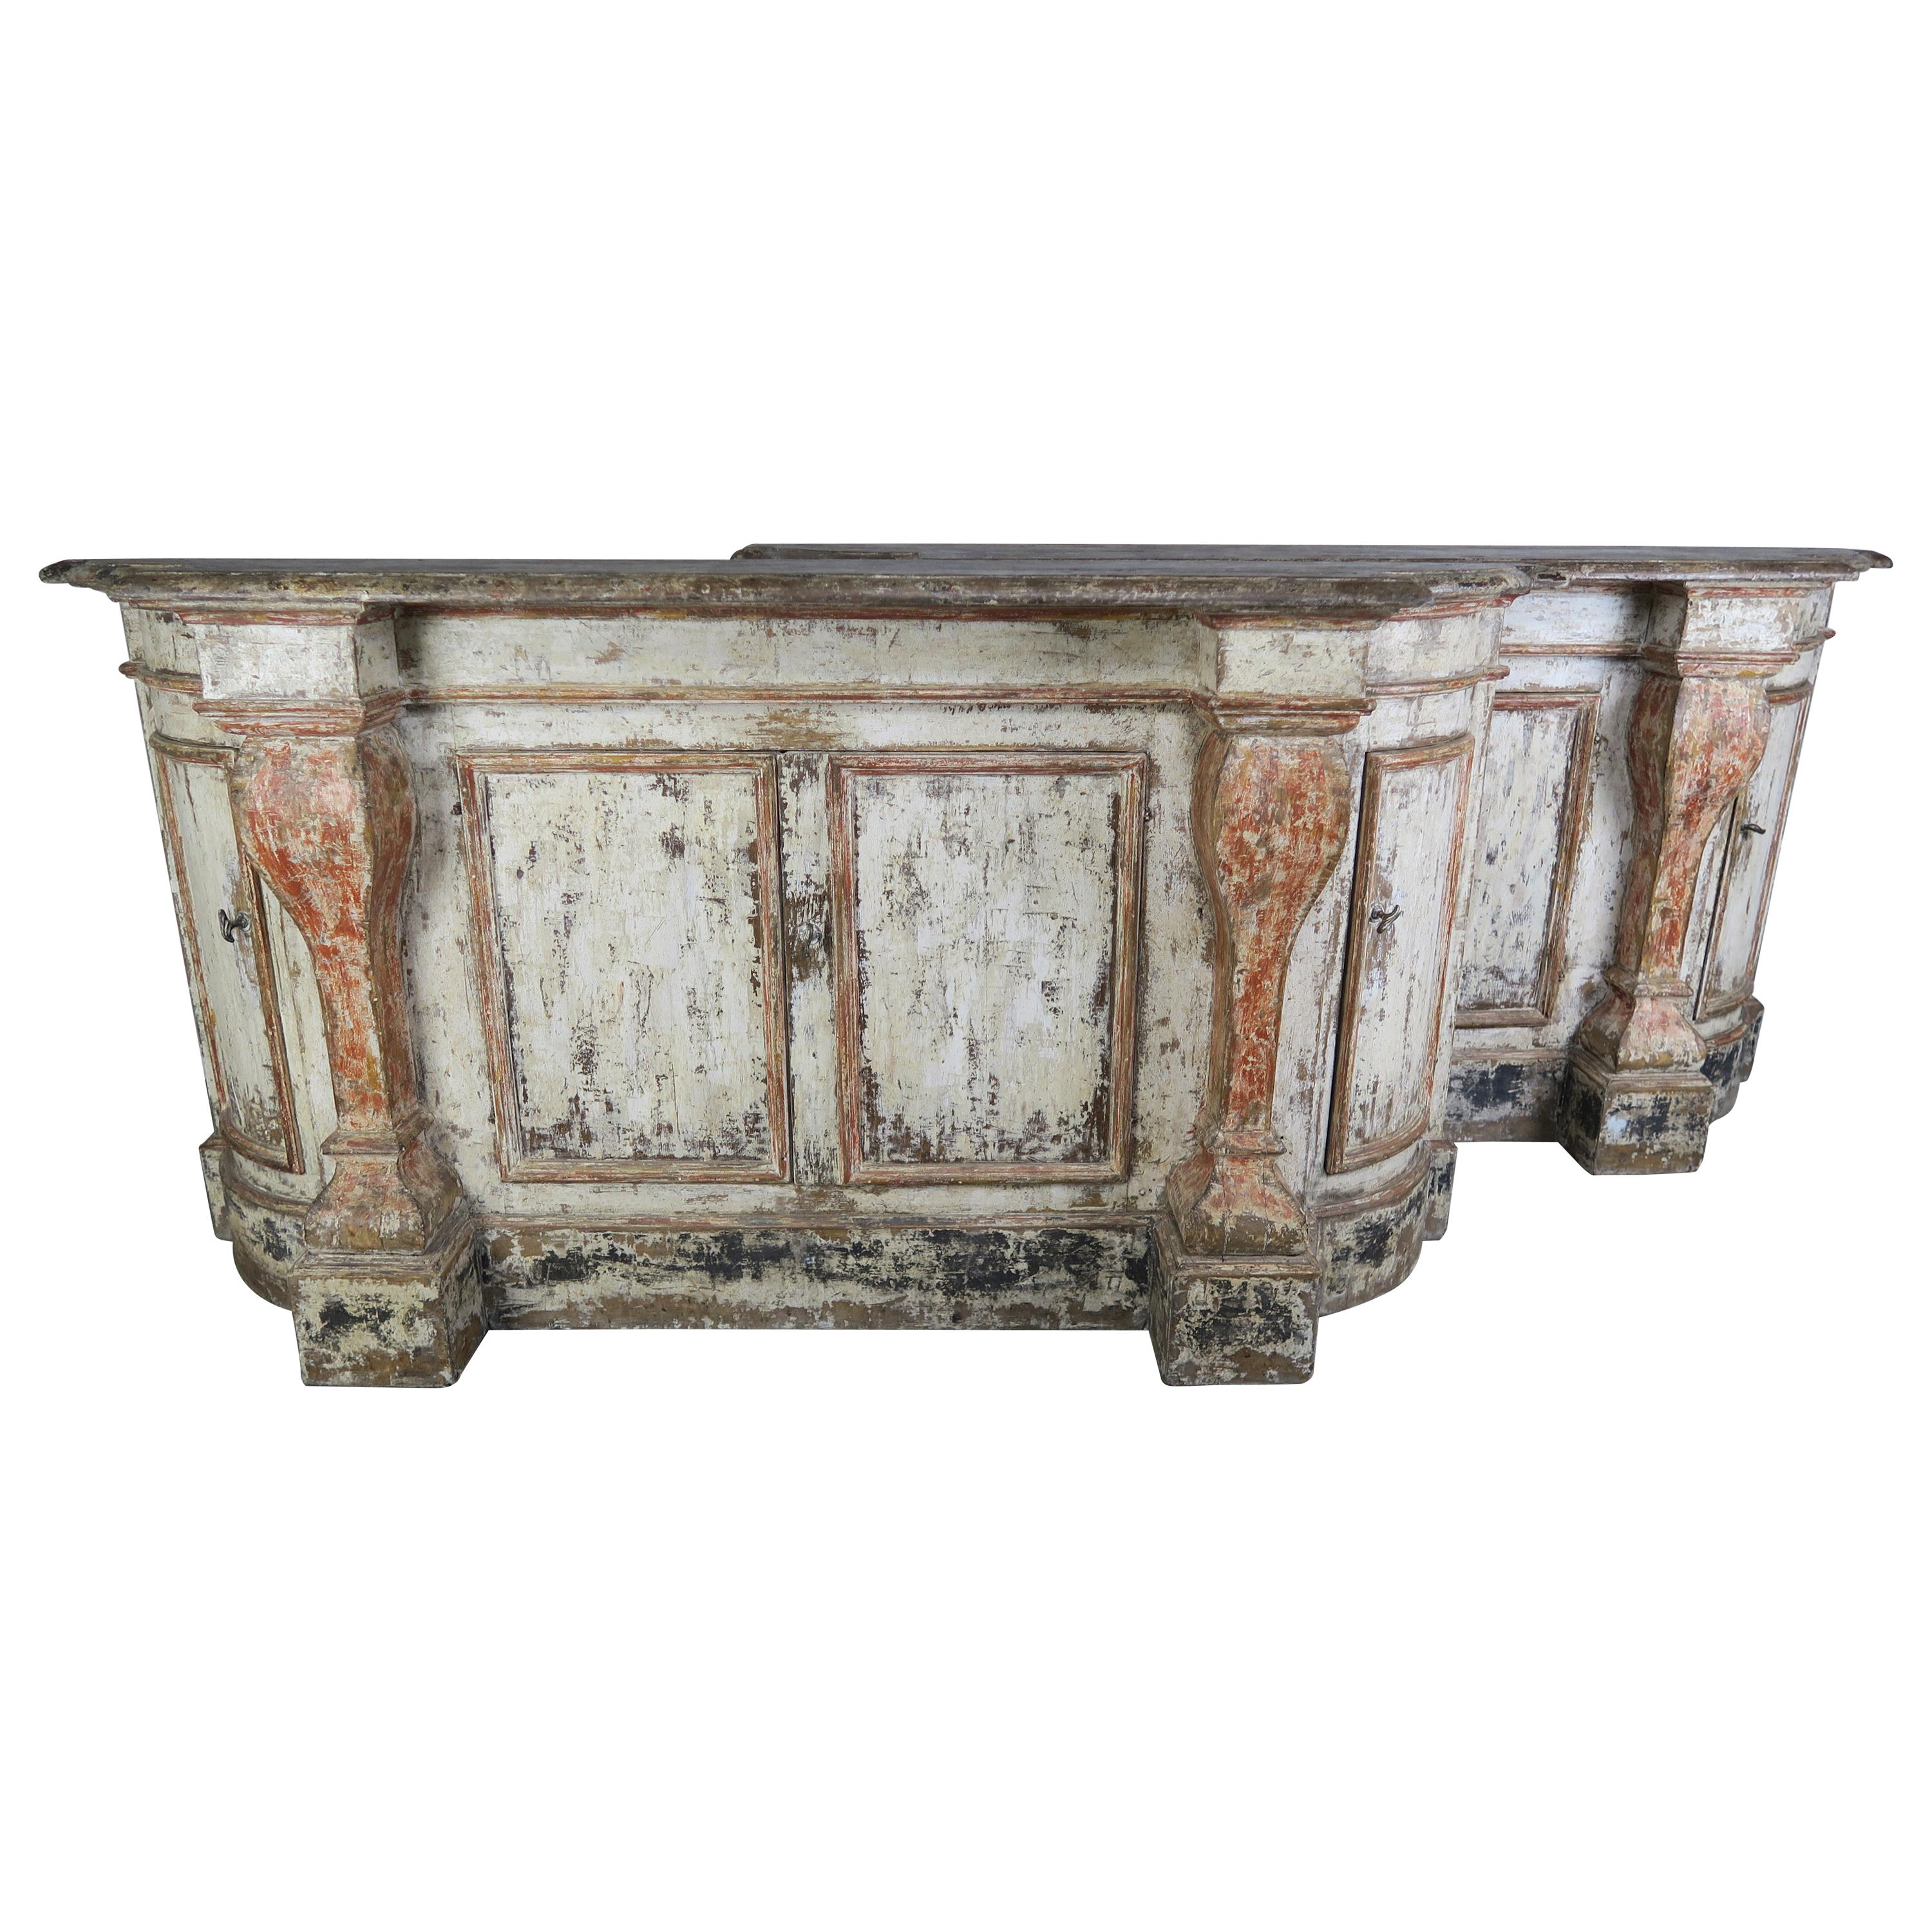 Pair of Early 19th Century Italian Tuscan Style Painted Sideboards